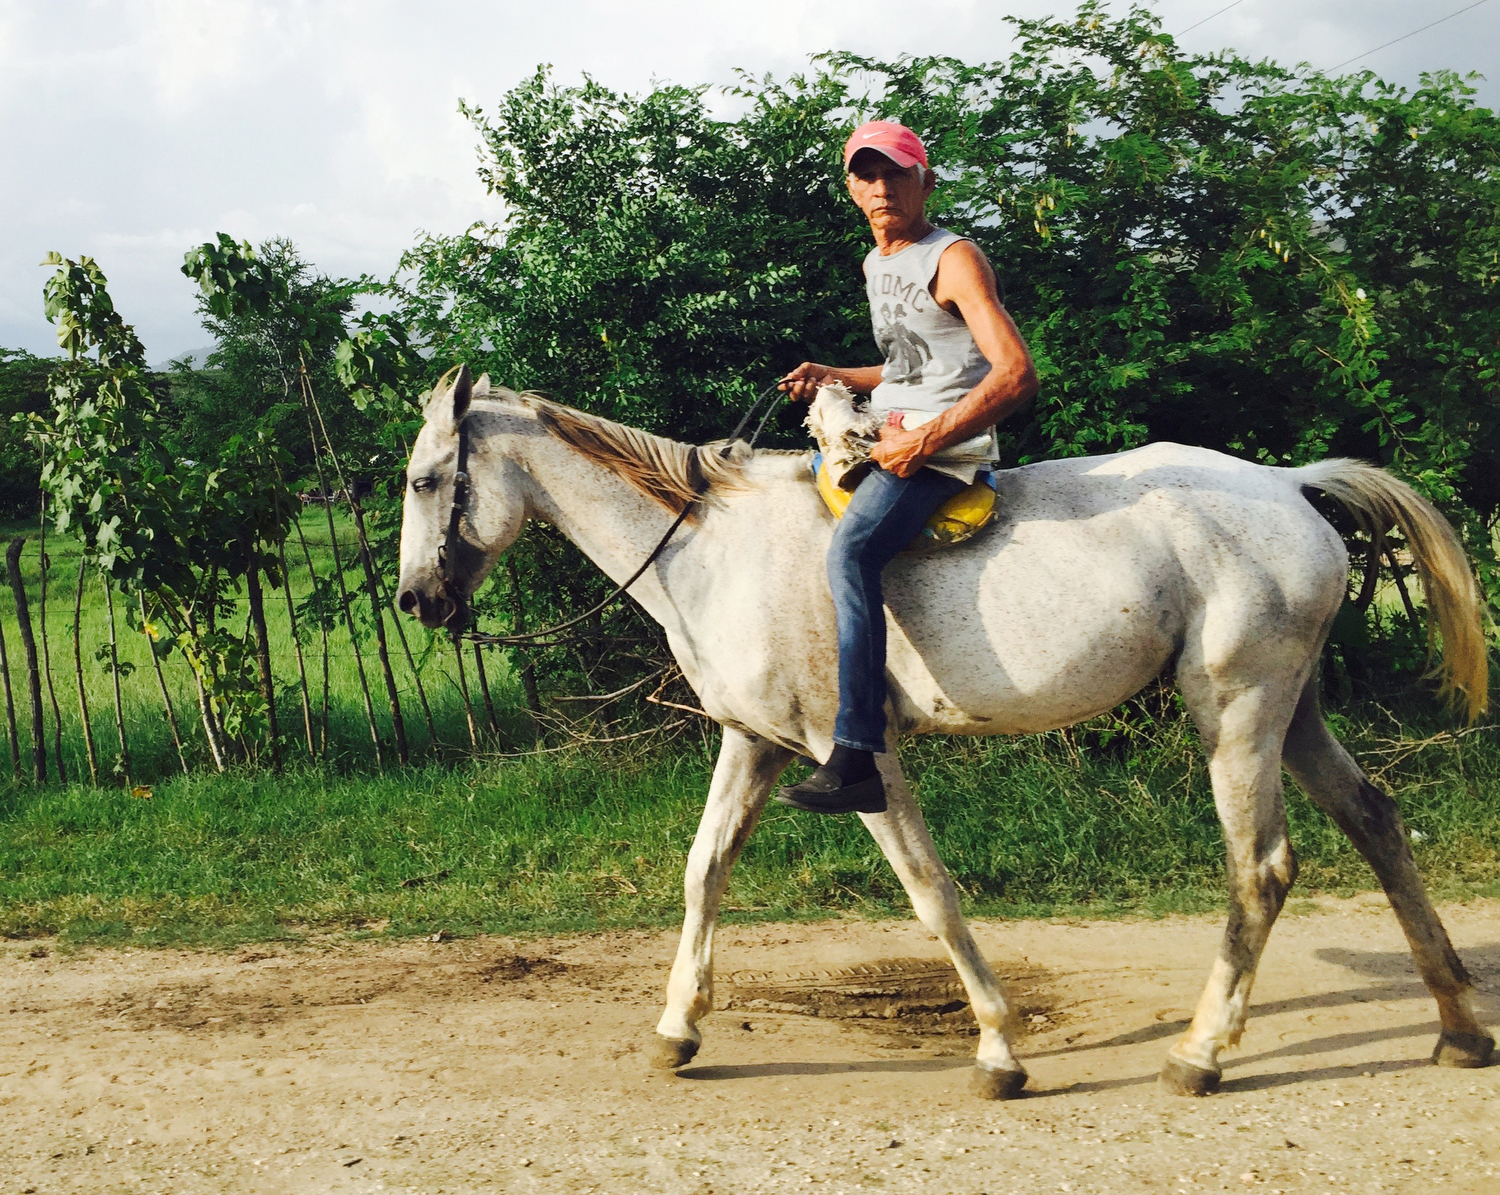  A man rides horse back near the small village towns in the Sierra Maestra mountain region outside of Santiago de Cuba. Many still ride horse carriages in the city to work. 